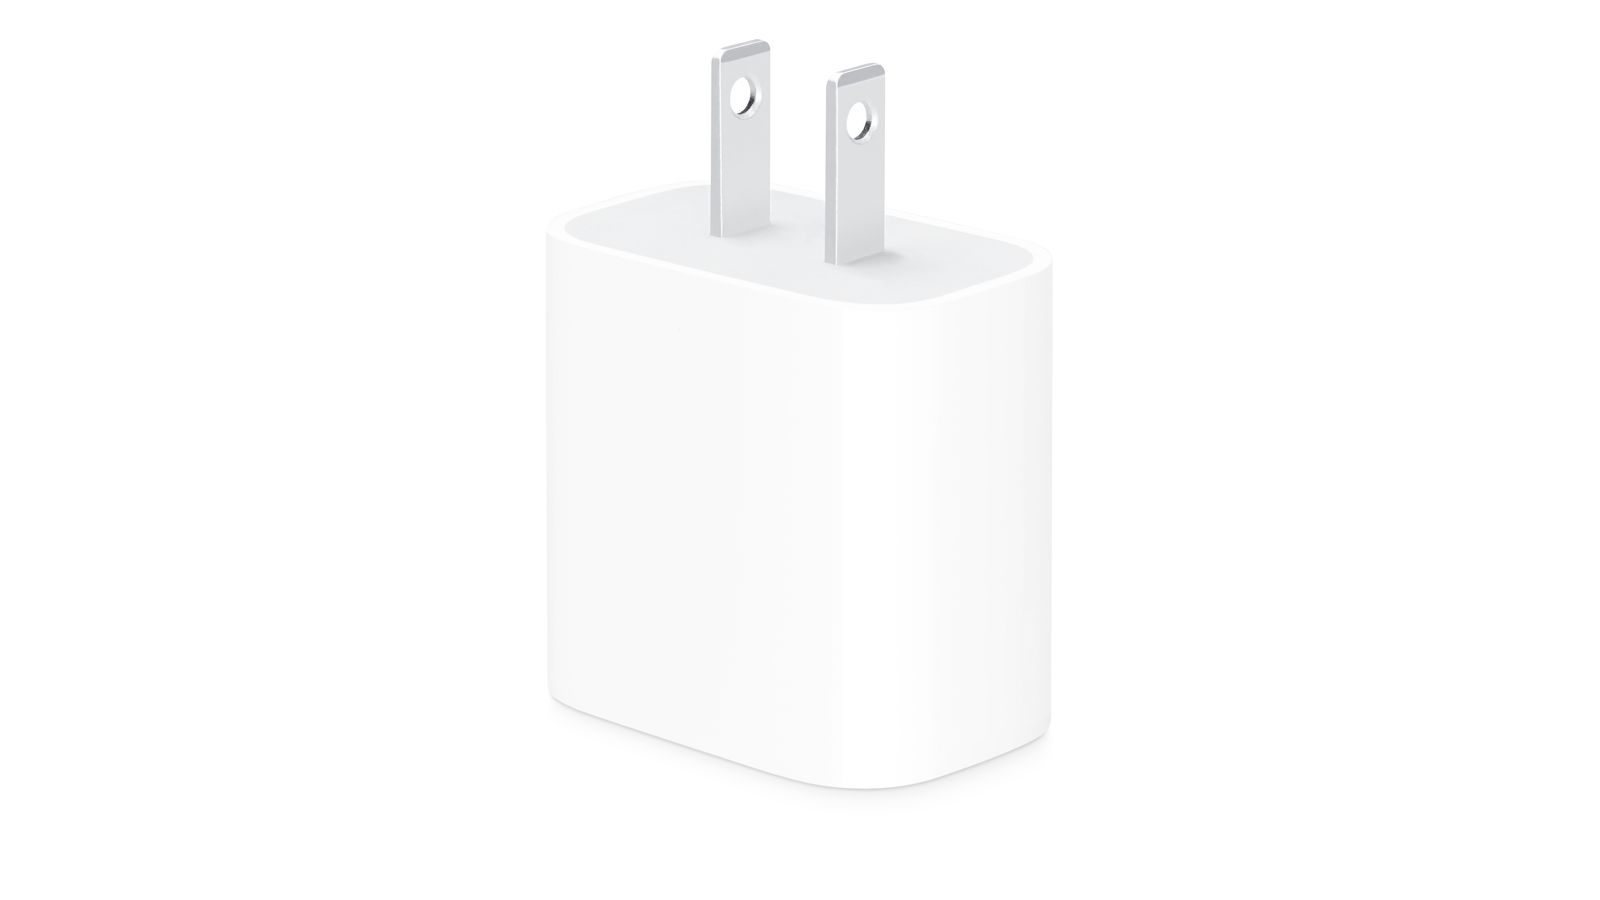 Deals: Woot’s New Sale Includes Discounts on Apple’s 20W USB-C Power Adapter and More